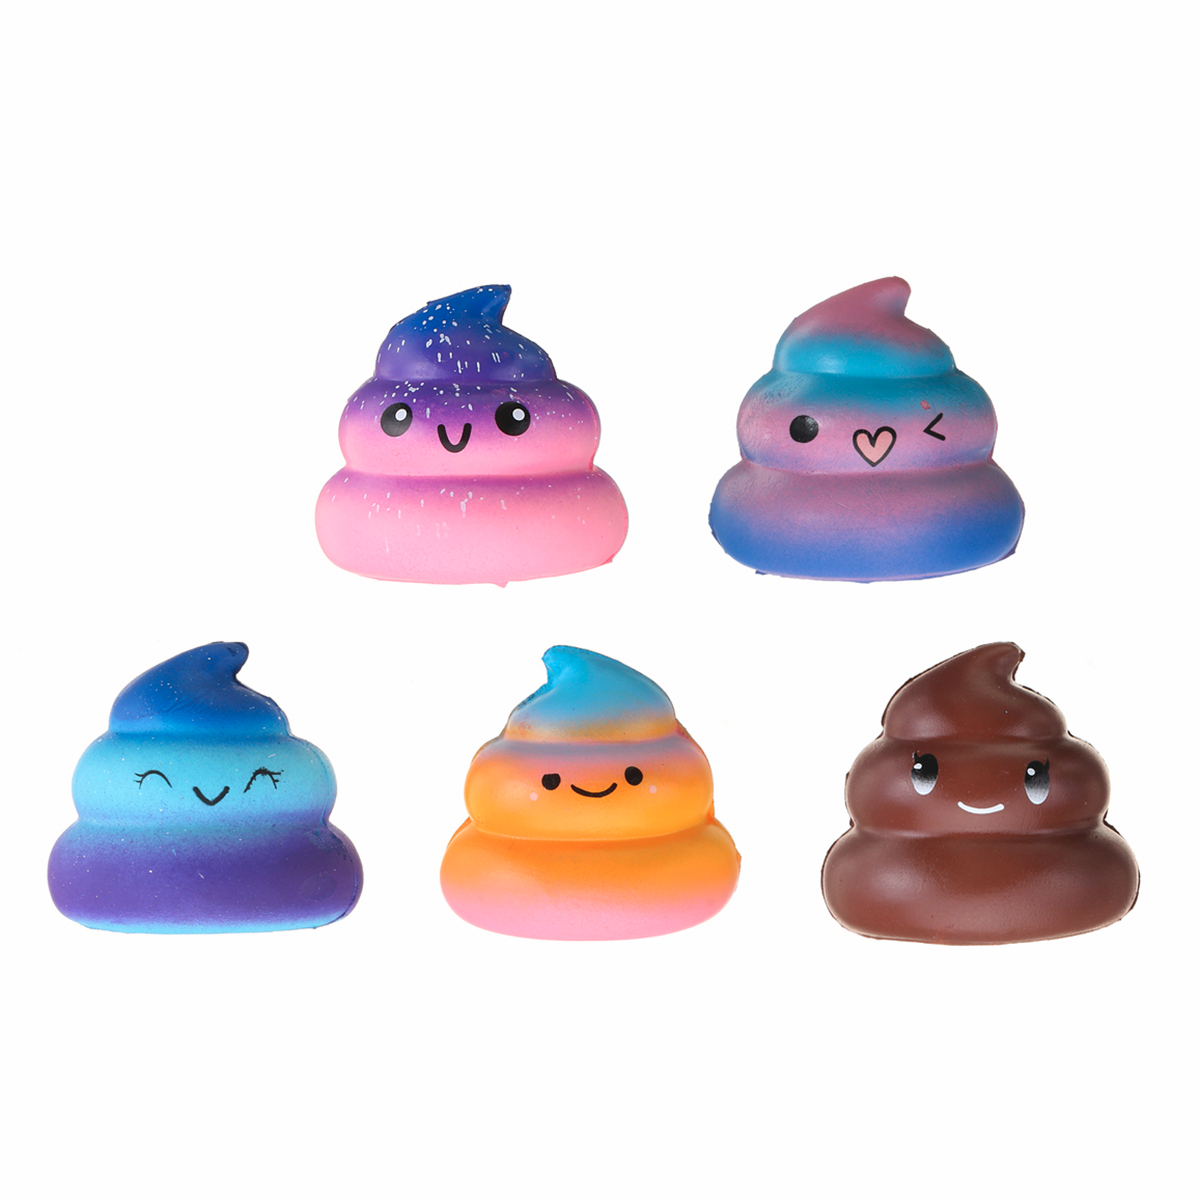 Squishy-Galaxy-Poo-Squishy-Hand-Pillow-65CM-Slow-Rising-With-Packaging-Collection-Gift-Decor-Toy-1311228-1